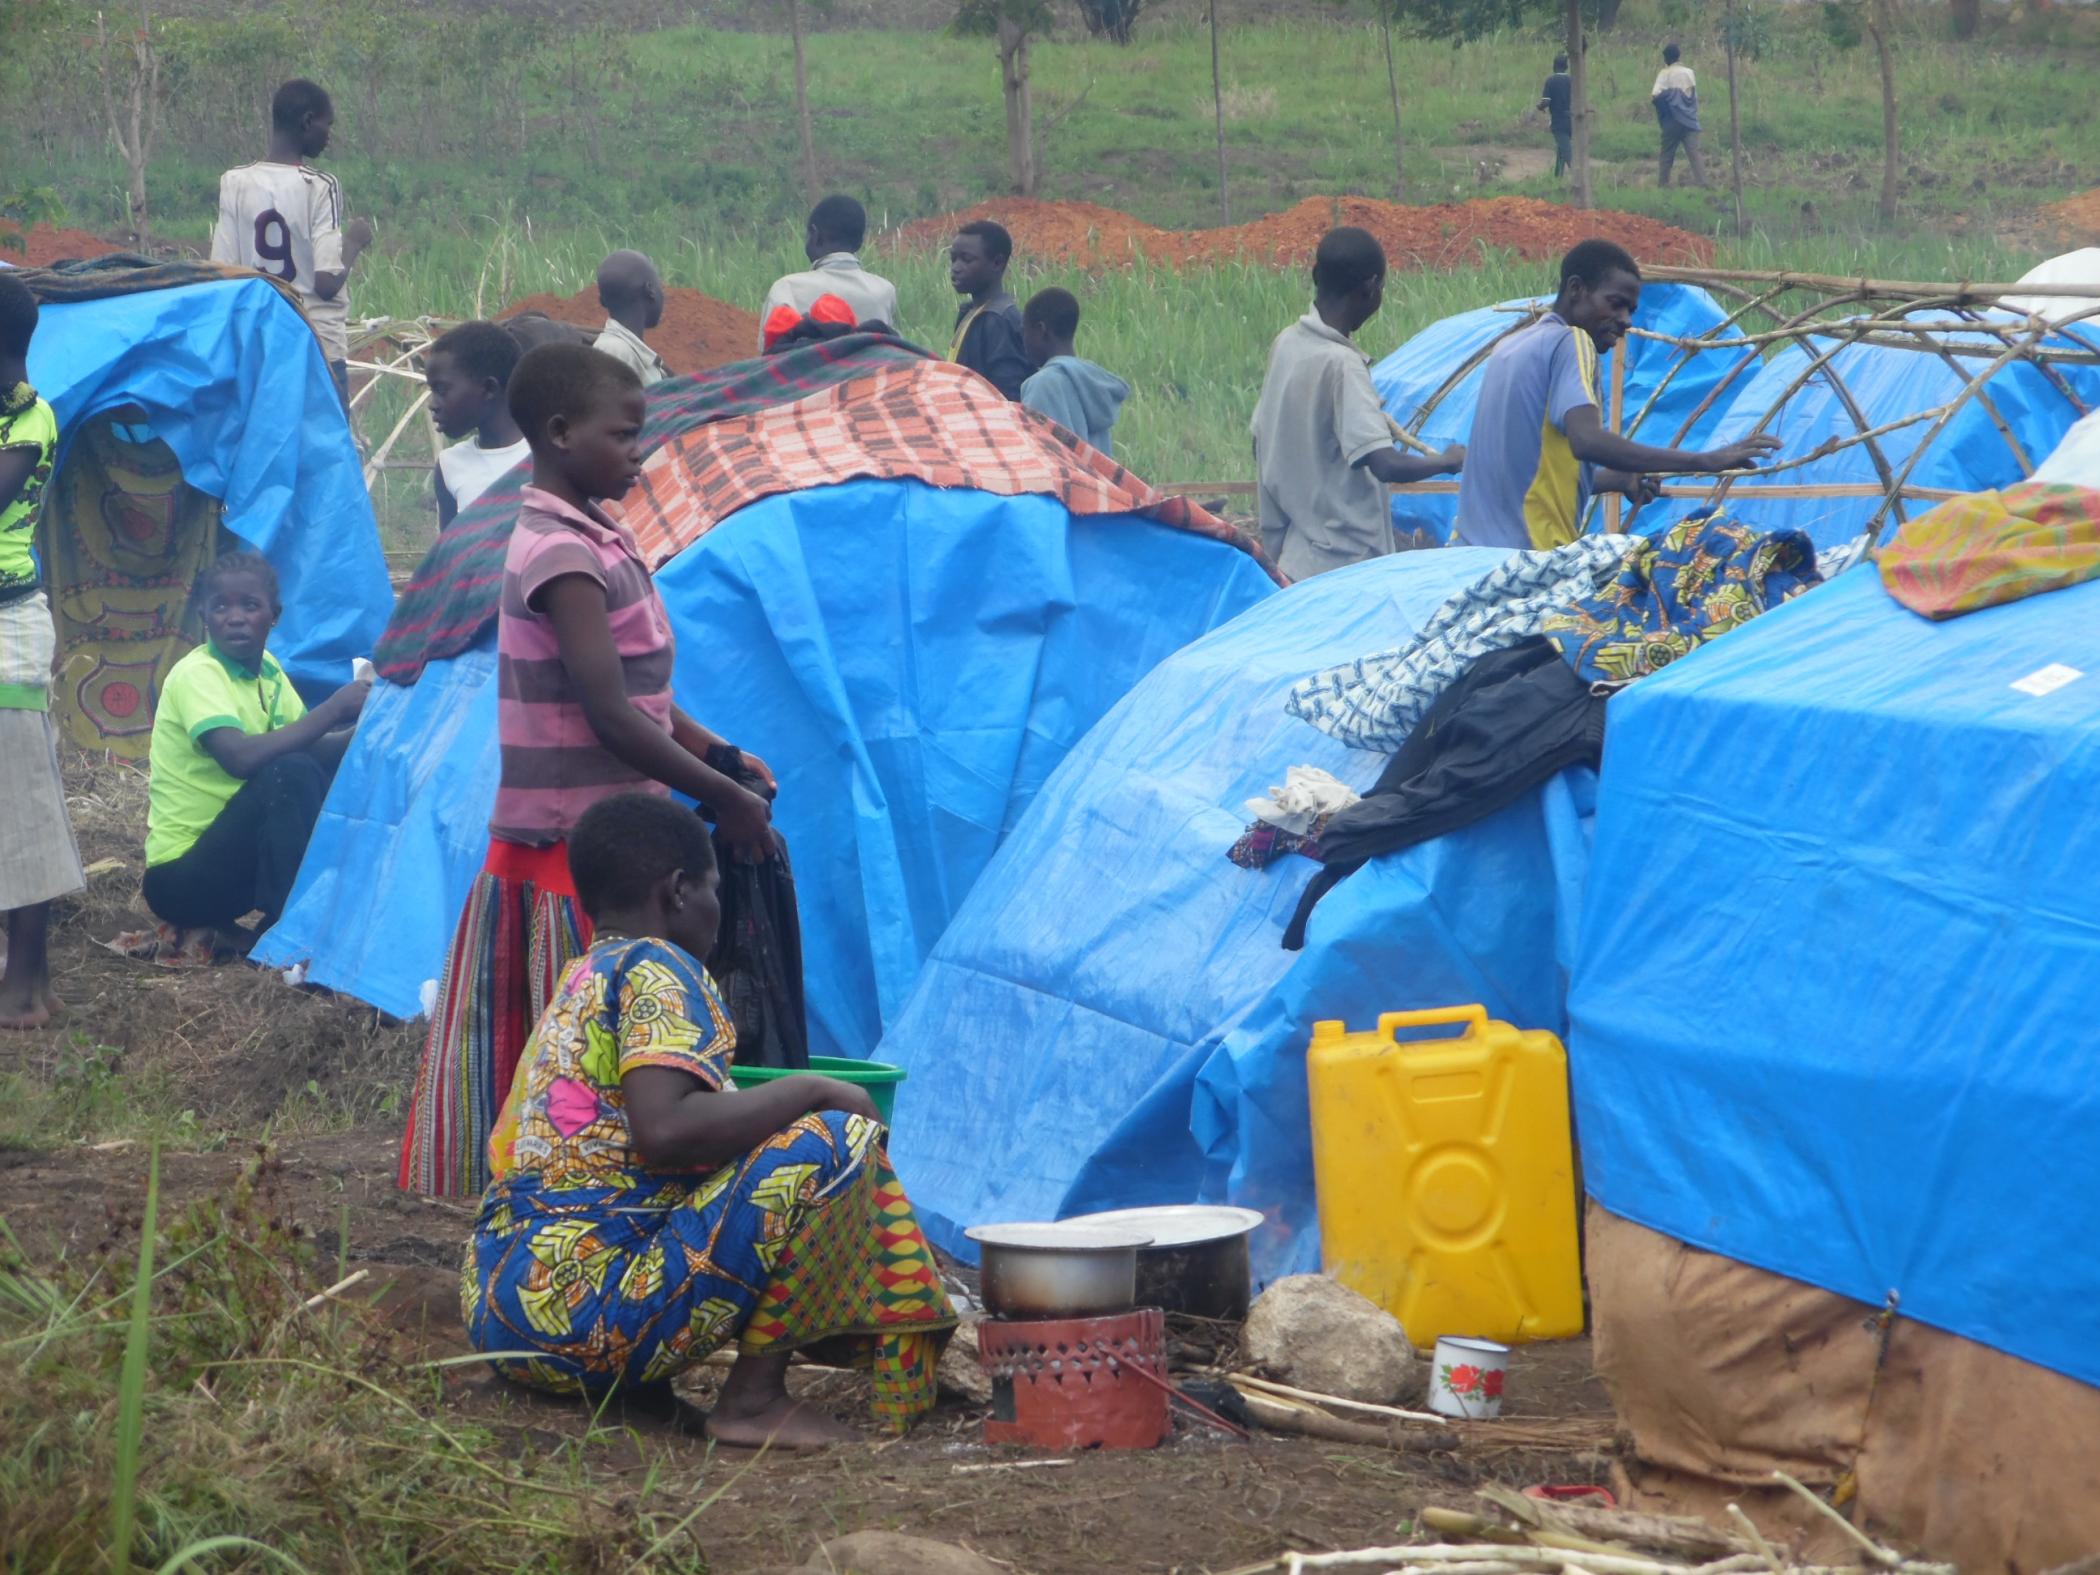 Camp in Bunia, Democratic Republic of Congo, for people displaced due to violence.